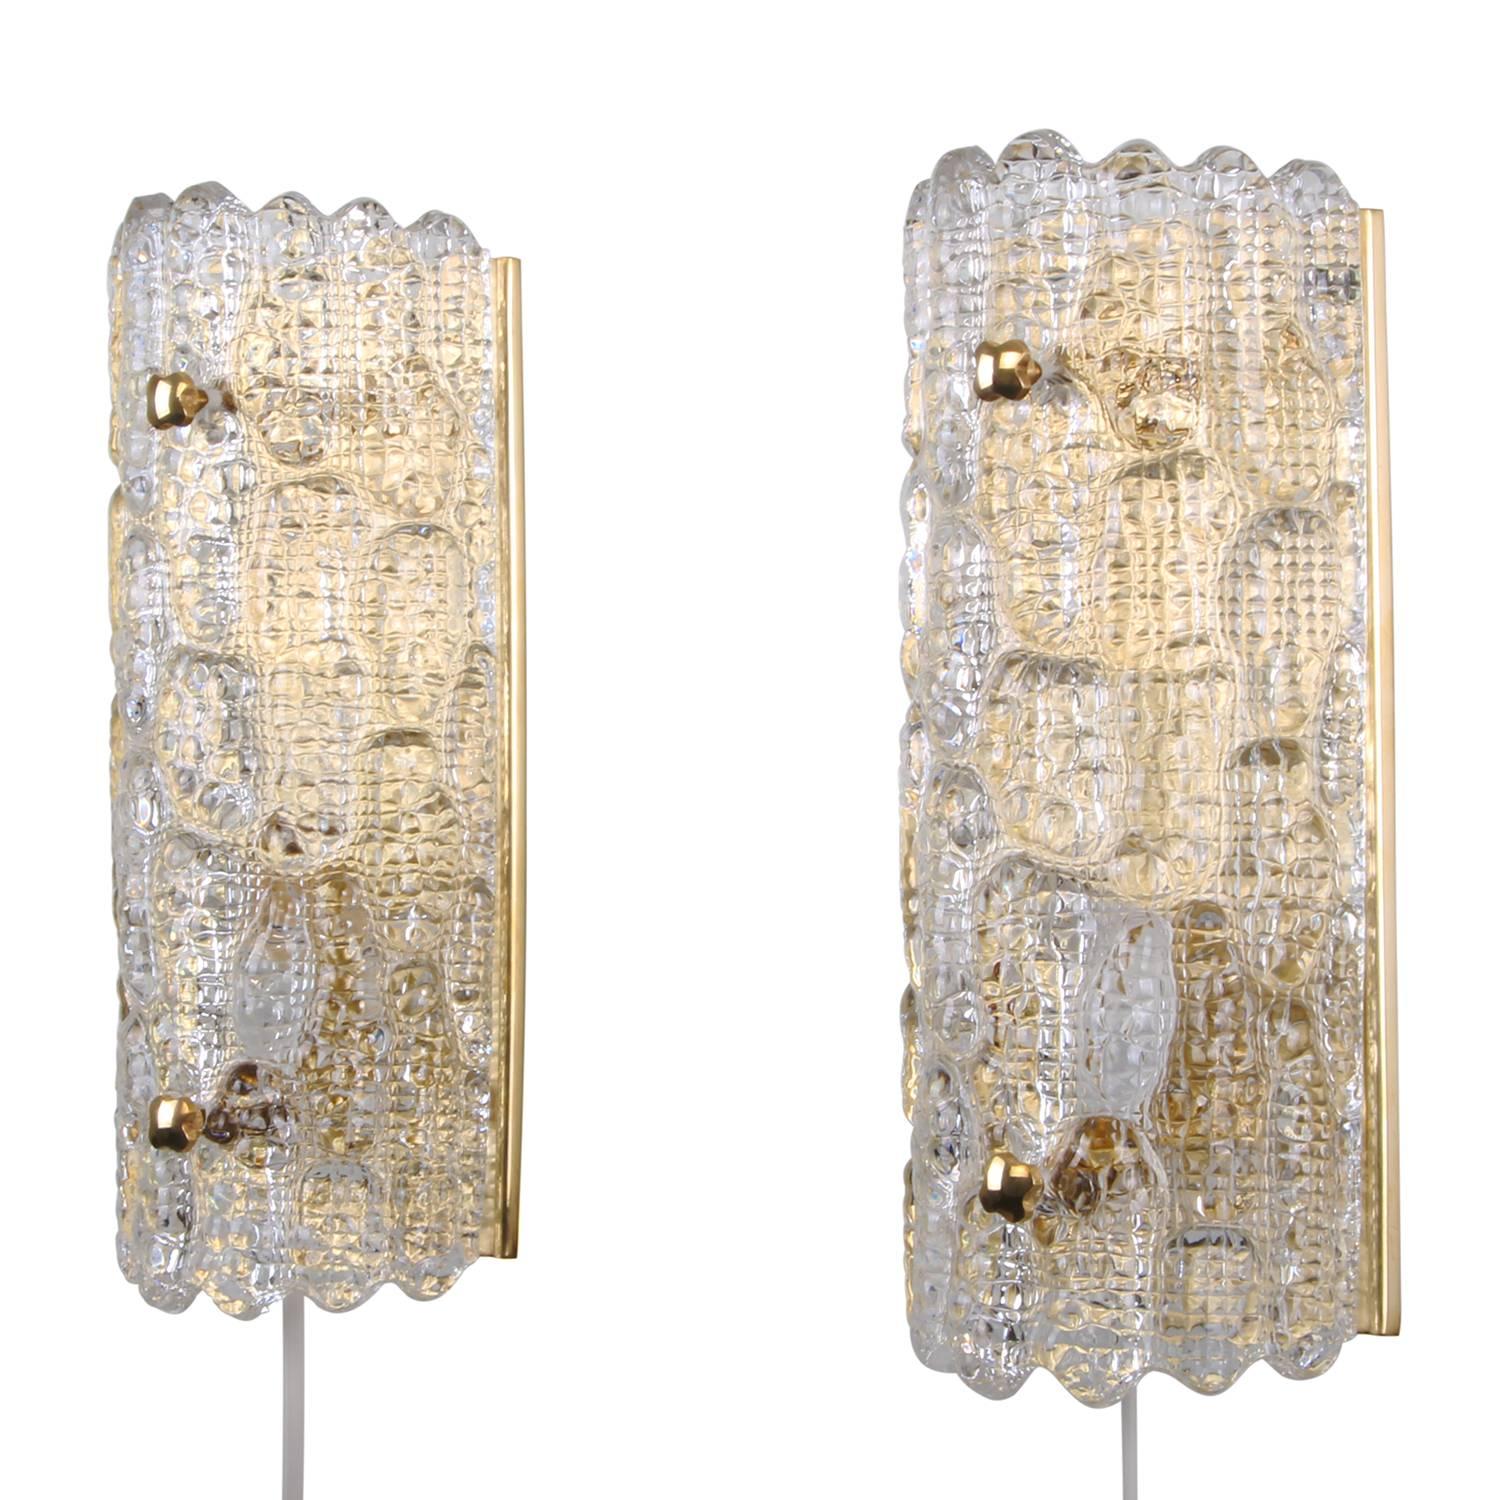 Polished Gefion Sconces 'Pair', Crystal Glass Wall Lights by Lyfa and Orrefors, 1960s For Sale